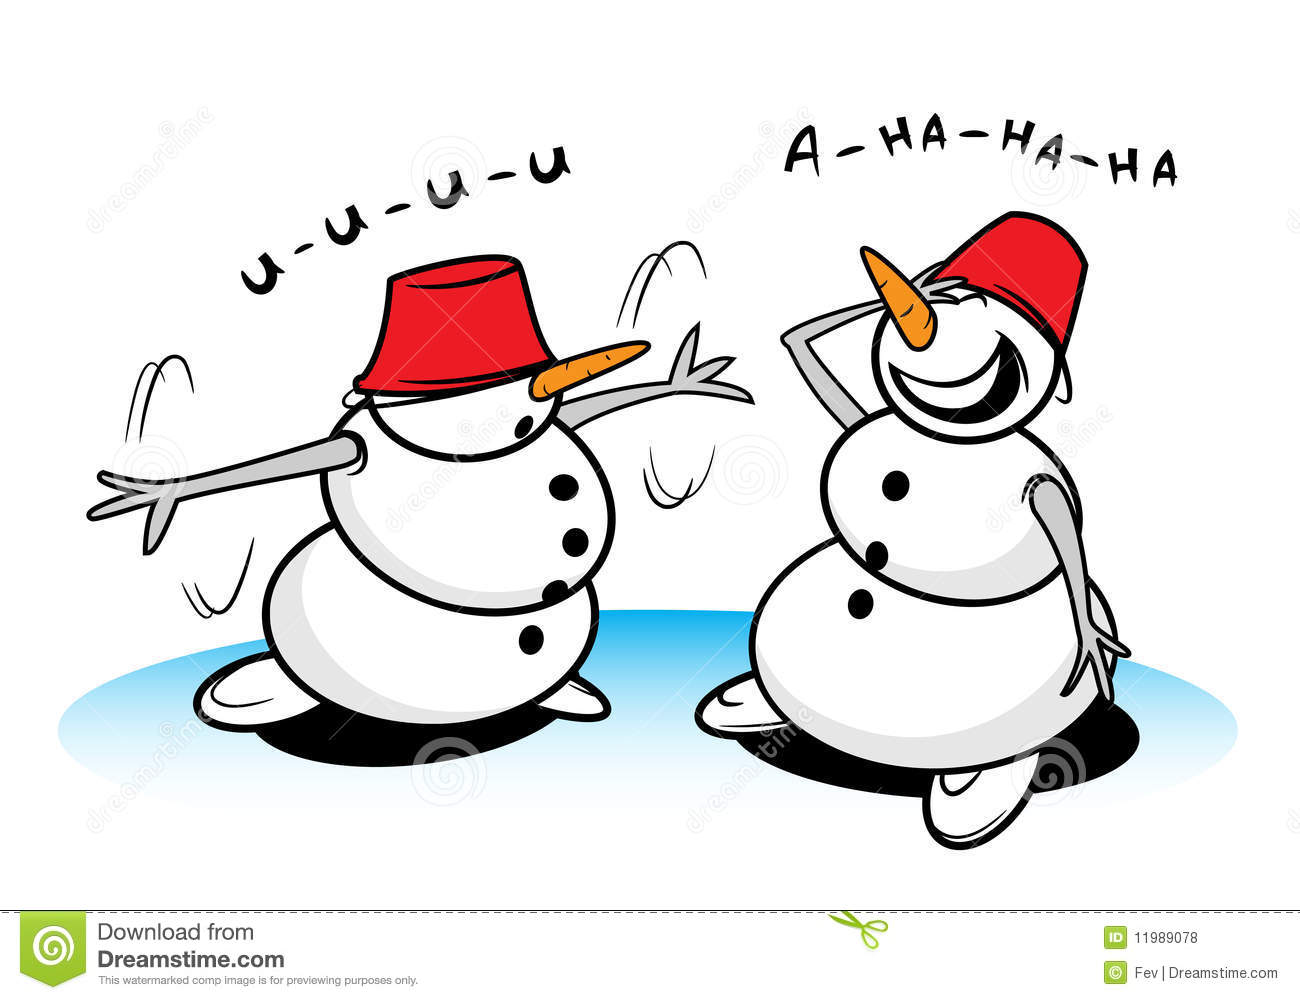 Silly Snowman Clipart Two Funny Snowman Royalty Free